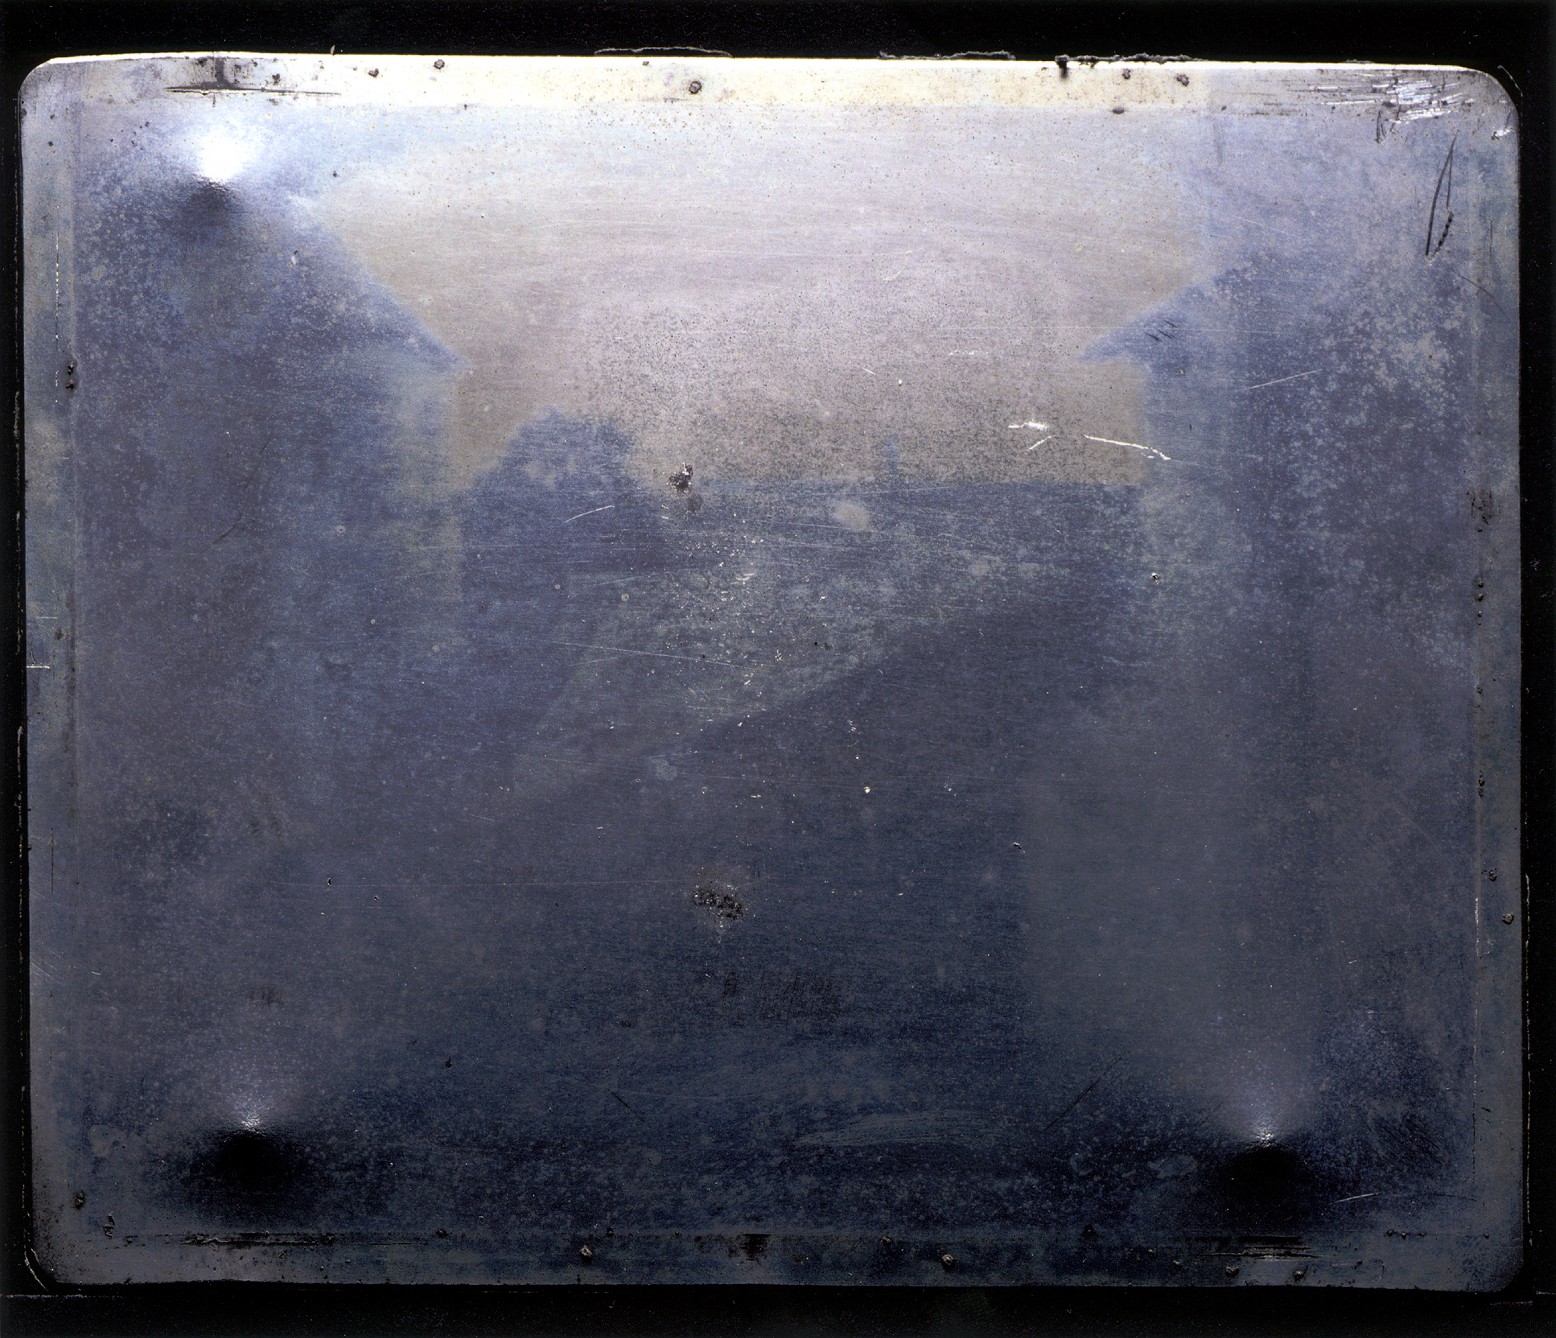 The original plate of “View from the Window at Le Gras”, a heliograph made by Nicéphore Niépce around 1827.